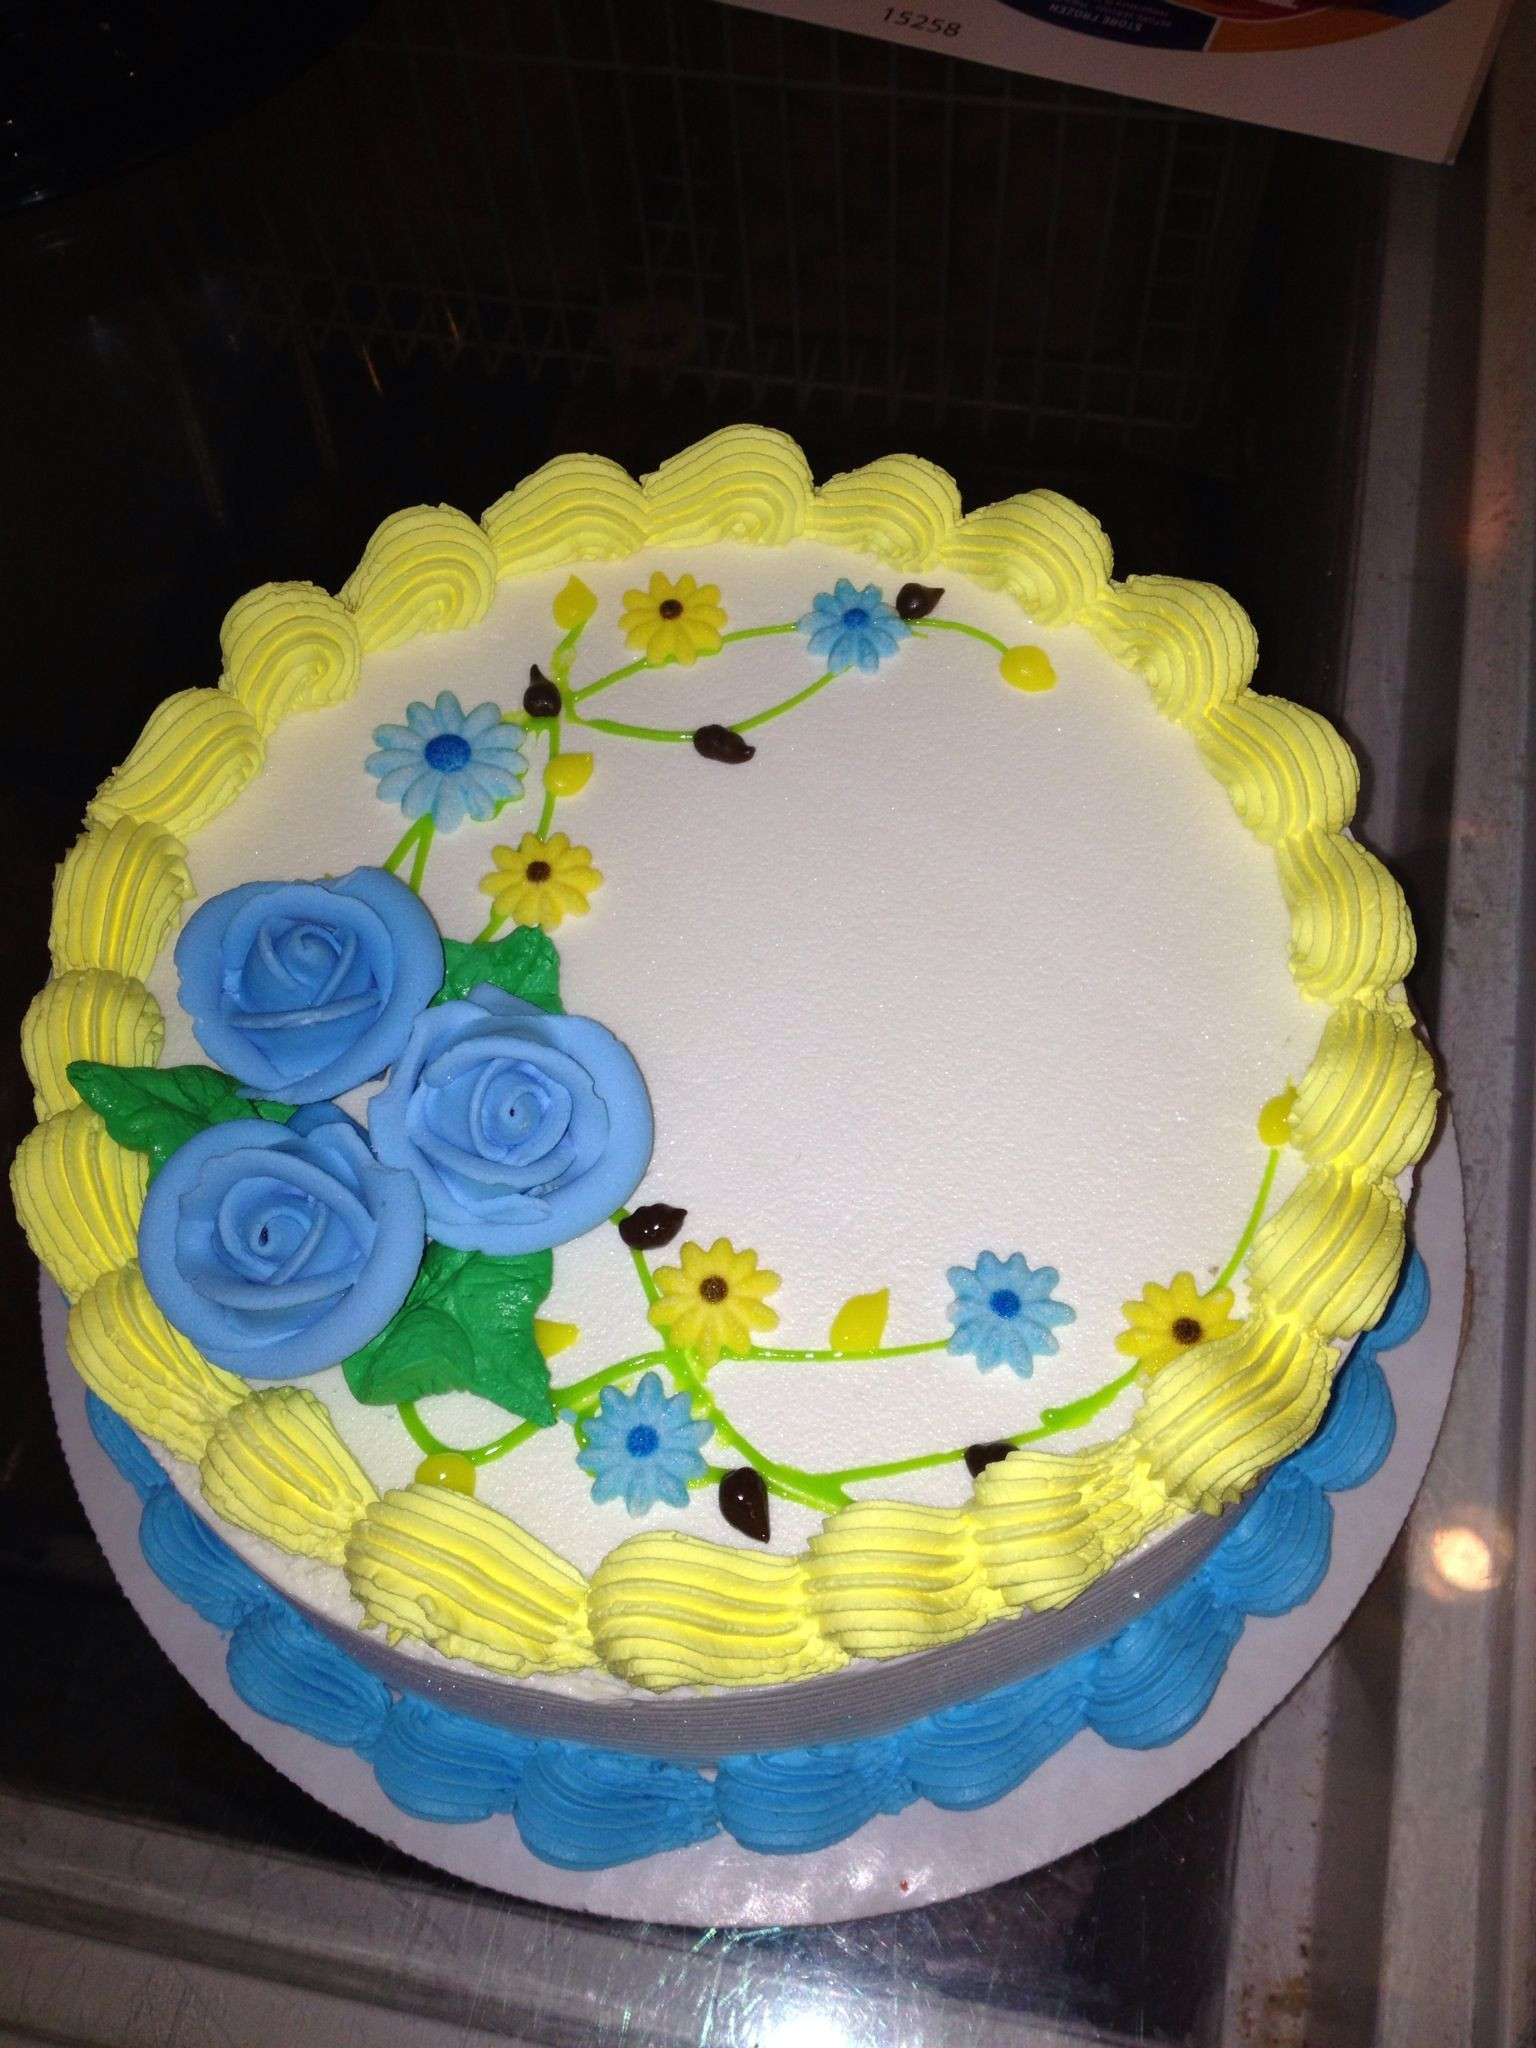 Dairy Queen Birthday Cakes
 Roses flowers Dq cakes Dairy Queen